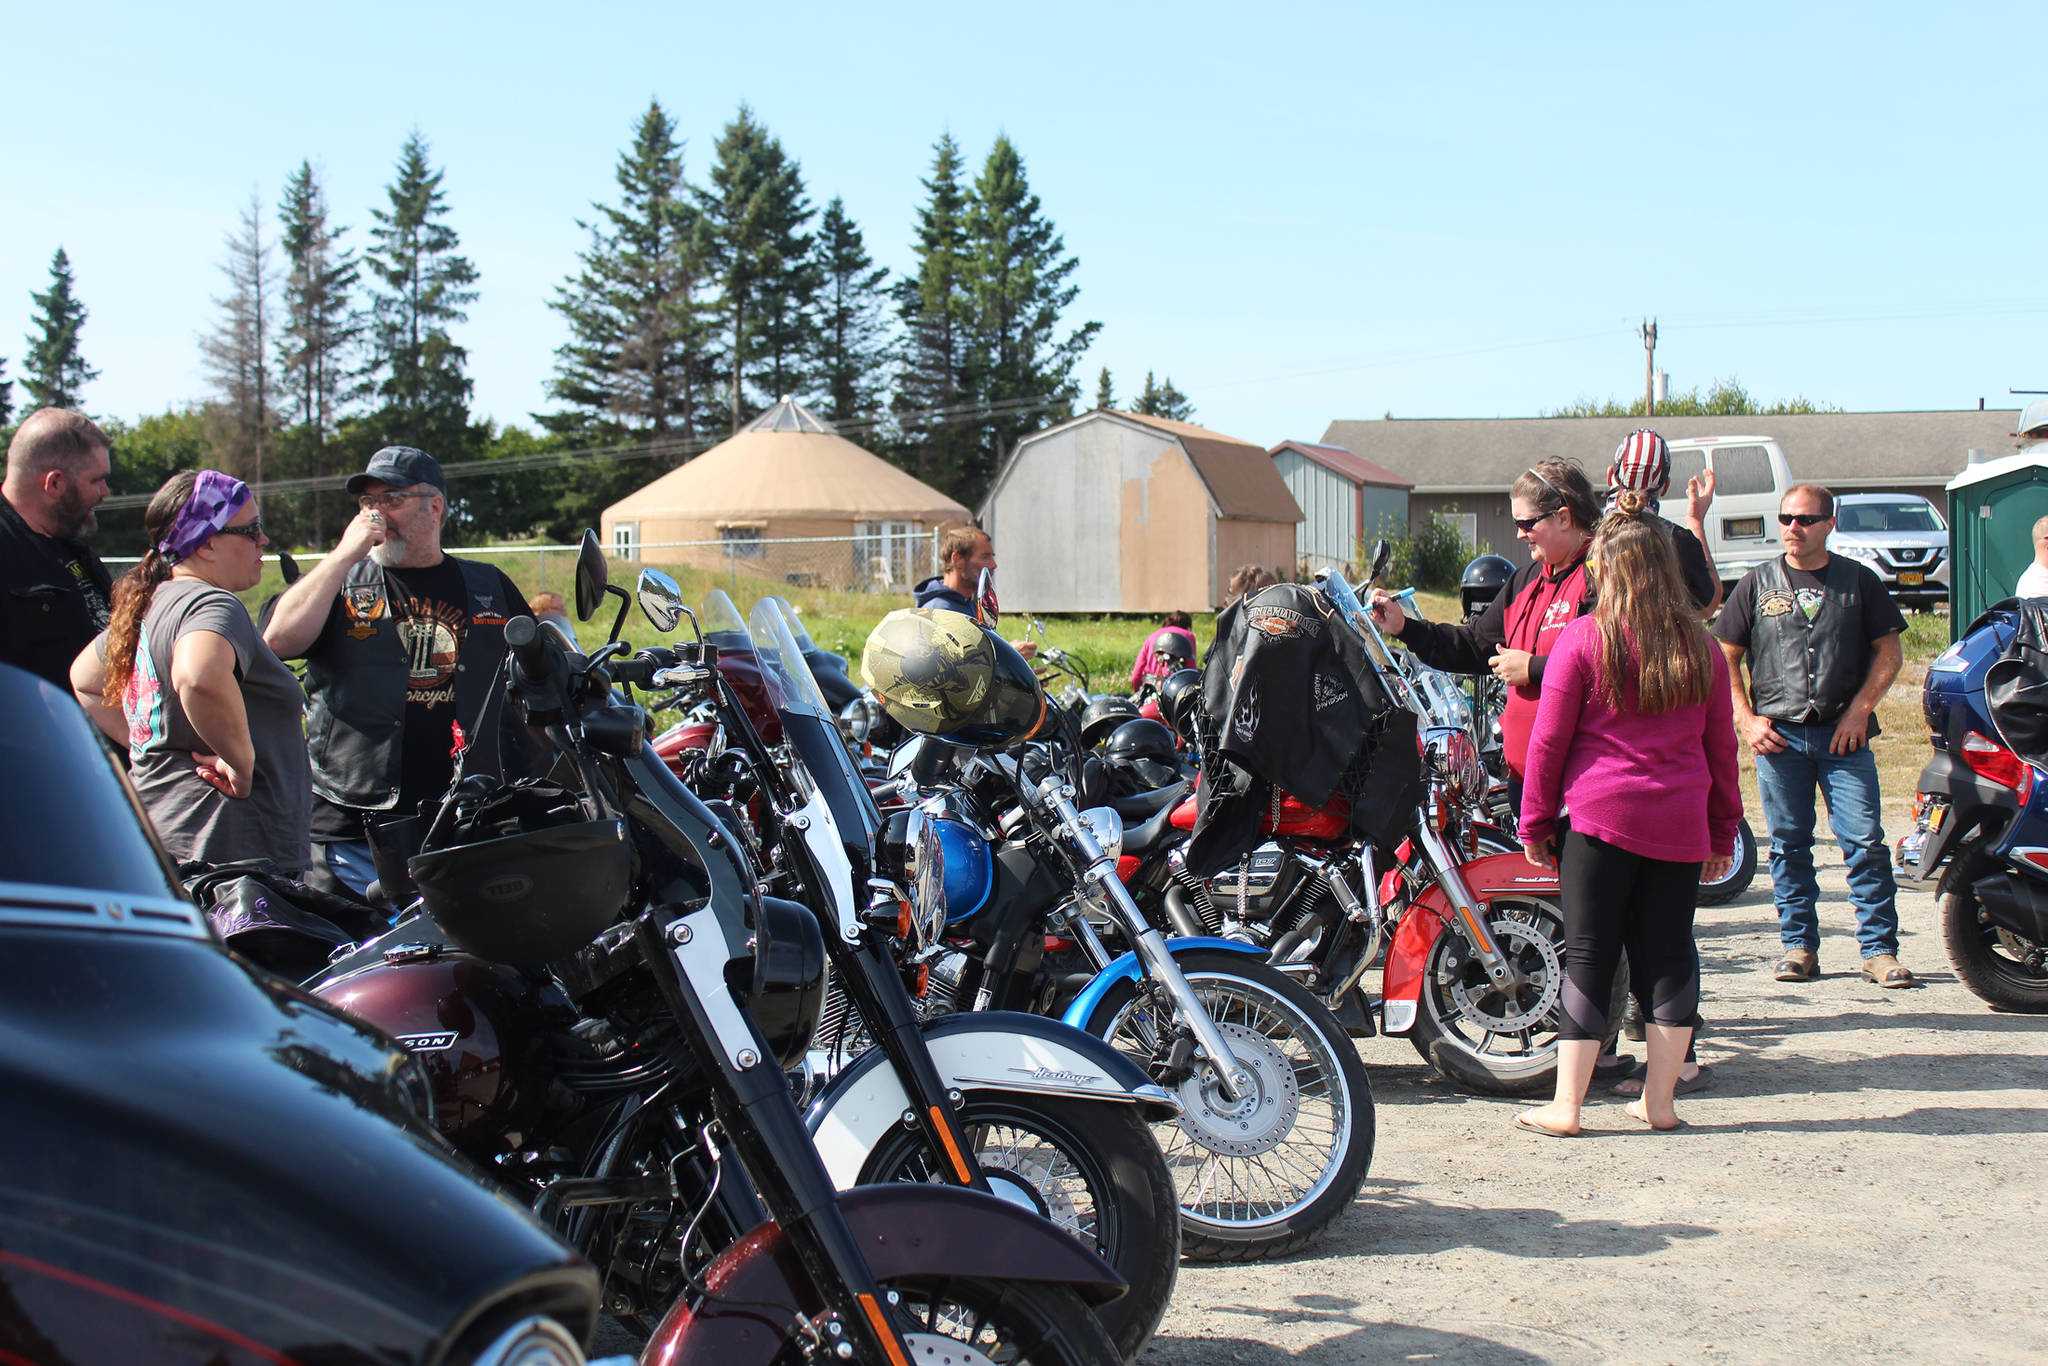 Bike riders and community members look at the myriad motorcycles assembled for the inaugural Homer Suicide Awareness and Prevention Ride and Drive on Saturday, Aug. 17, 2019 starting at the Homer Christian Church on East End Road in Homer, Alaska. (Photo by Megan Pacer/Homer News)